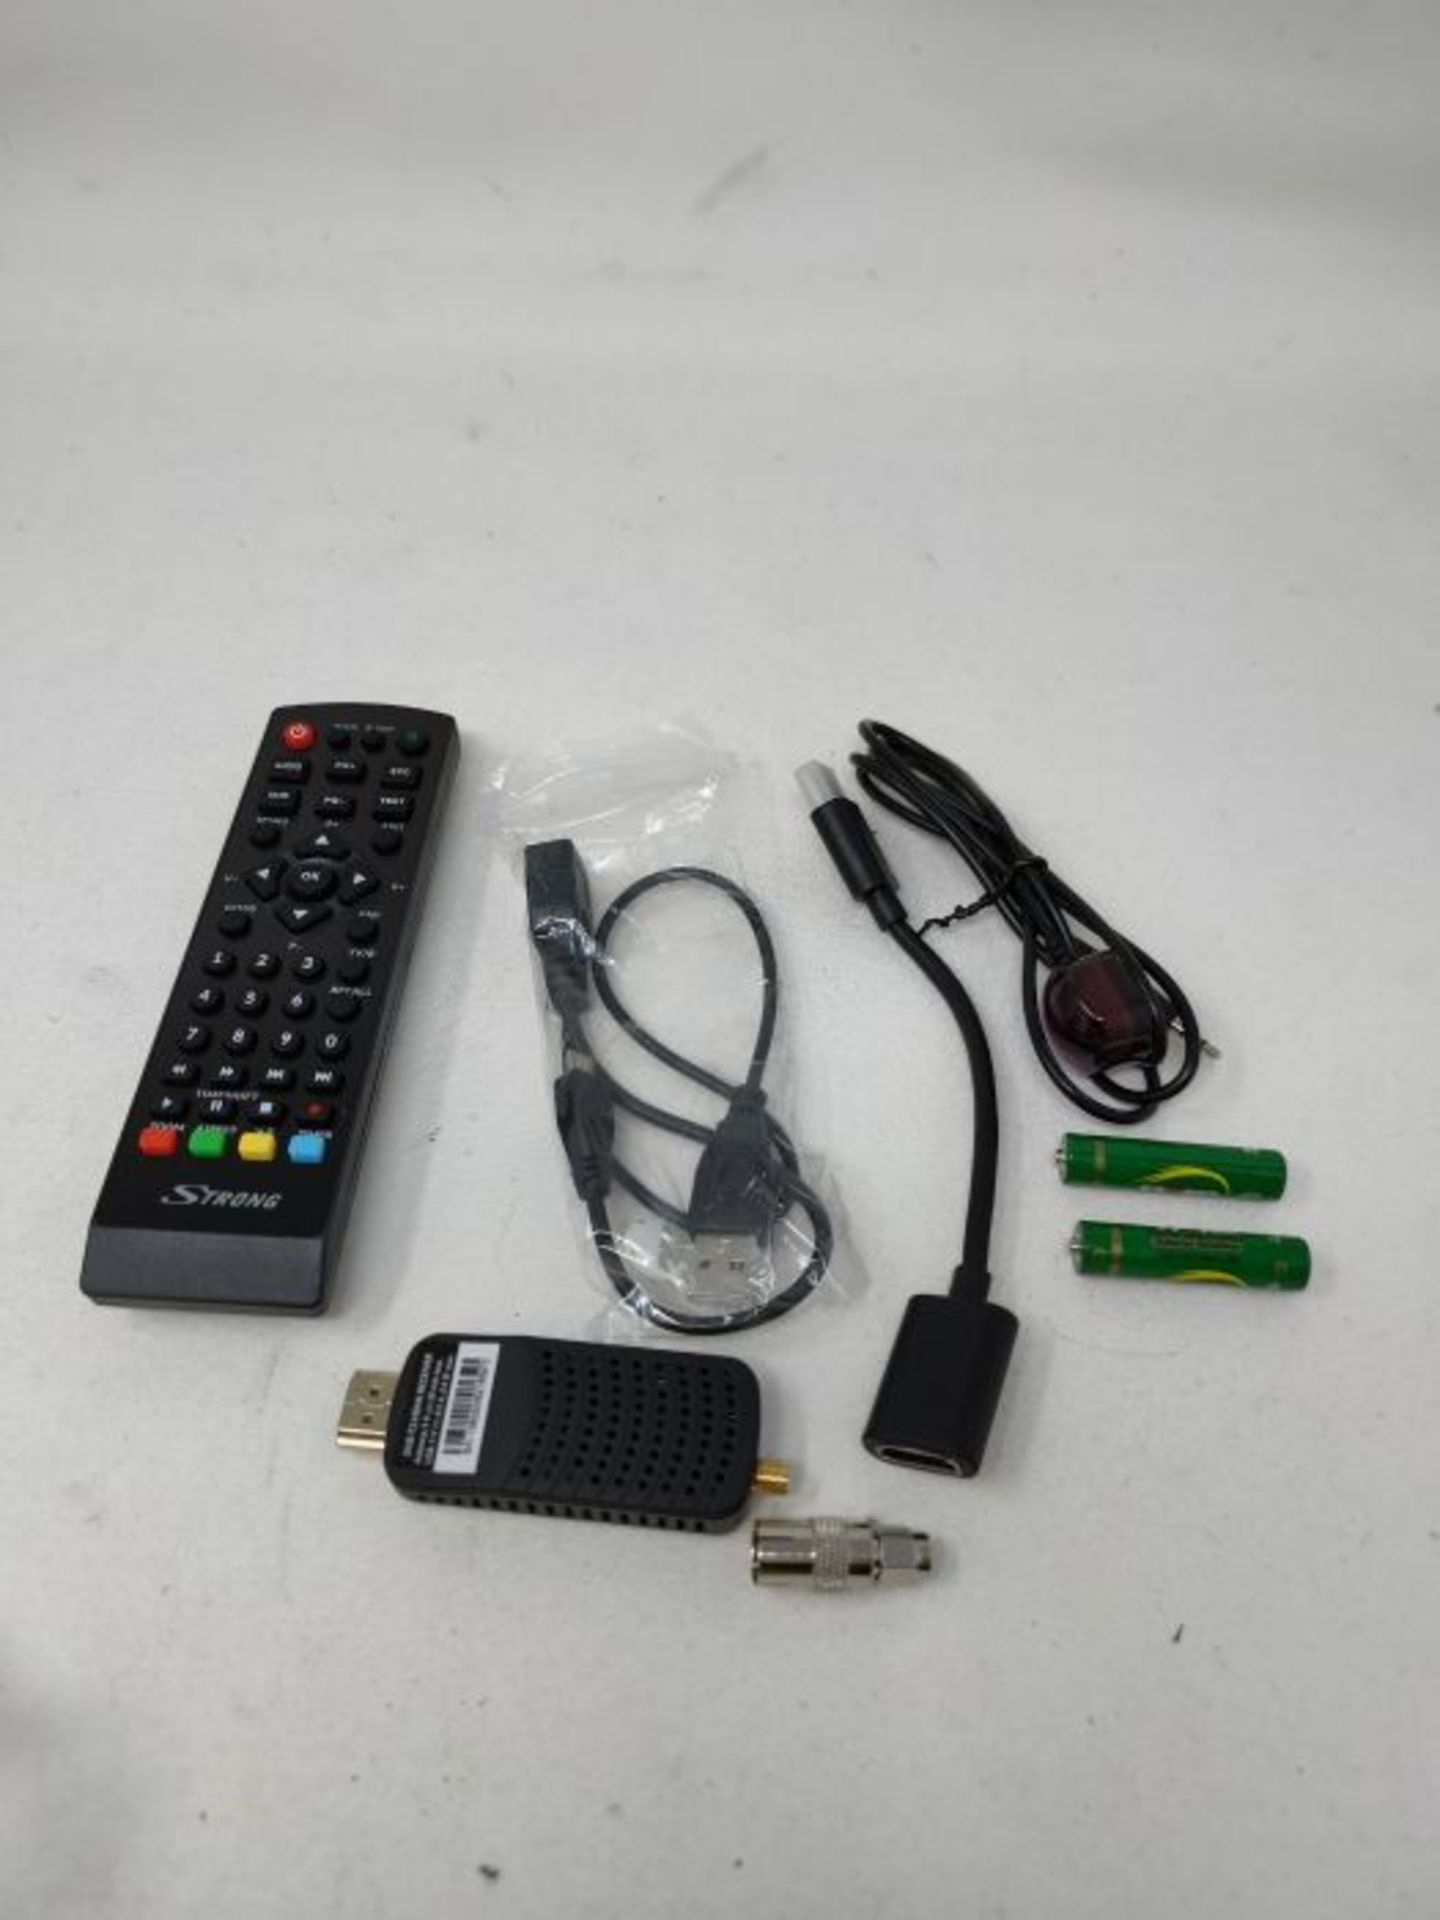 Strong SRT82 Full HD DVB-T2 HDMI Stick - Compatible with Hevc265 - TV Receiver/Tuner w - Image 3 of 3